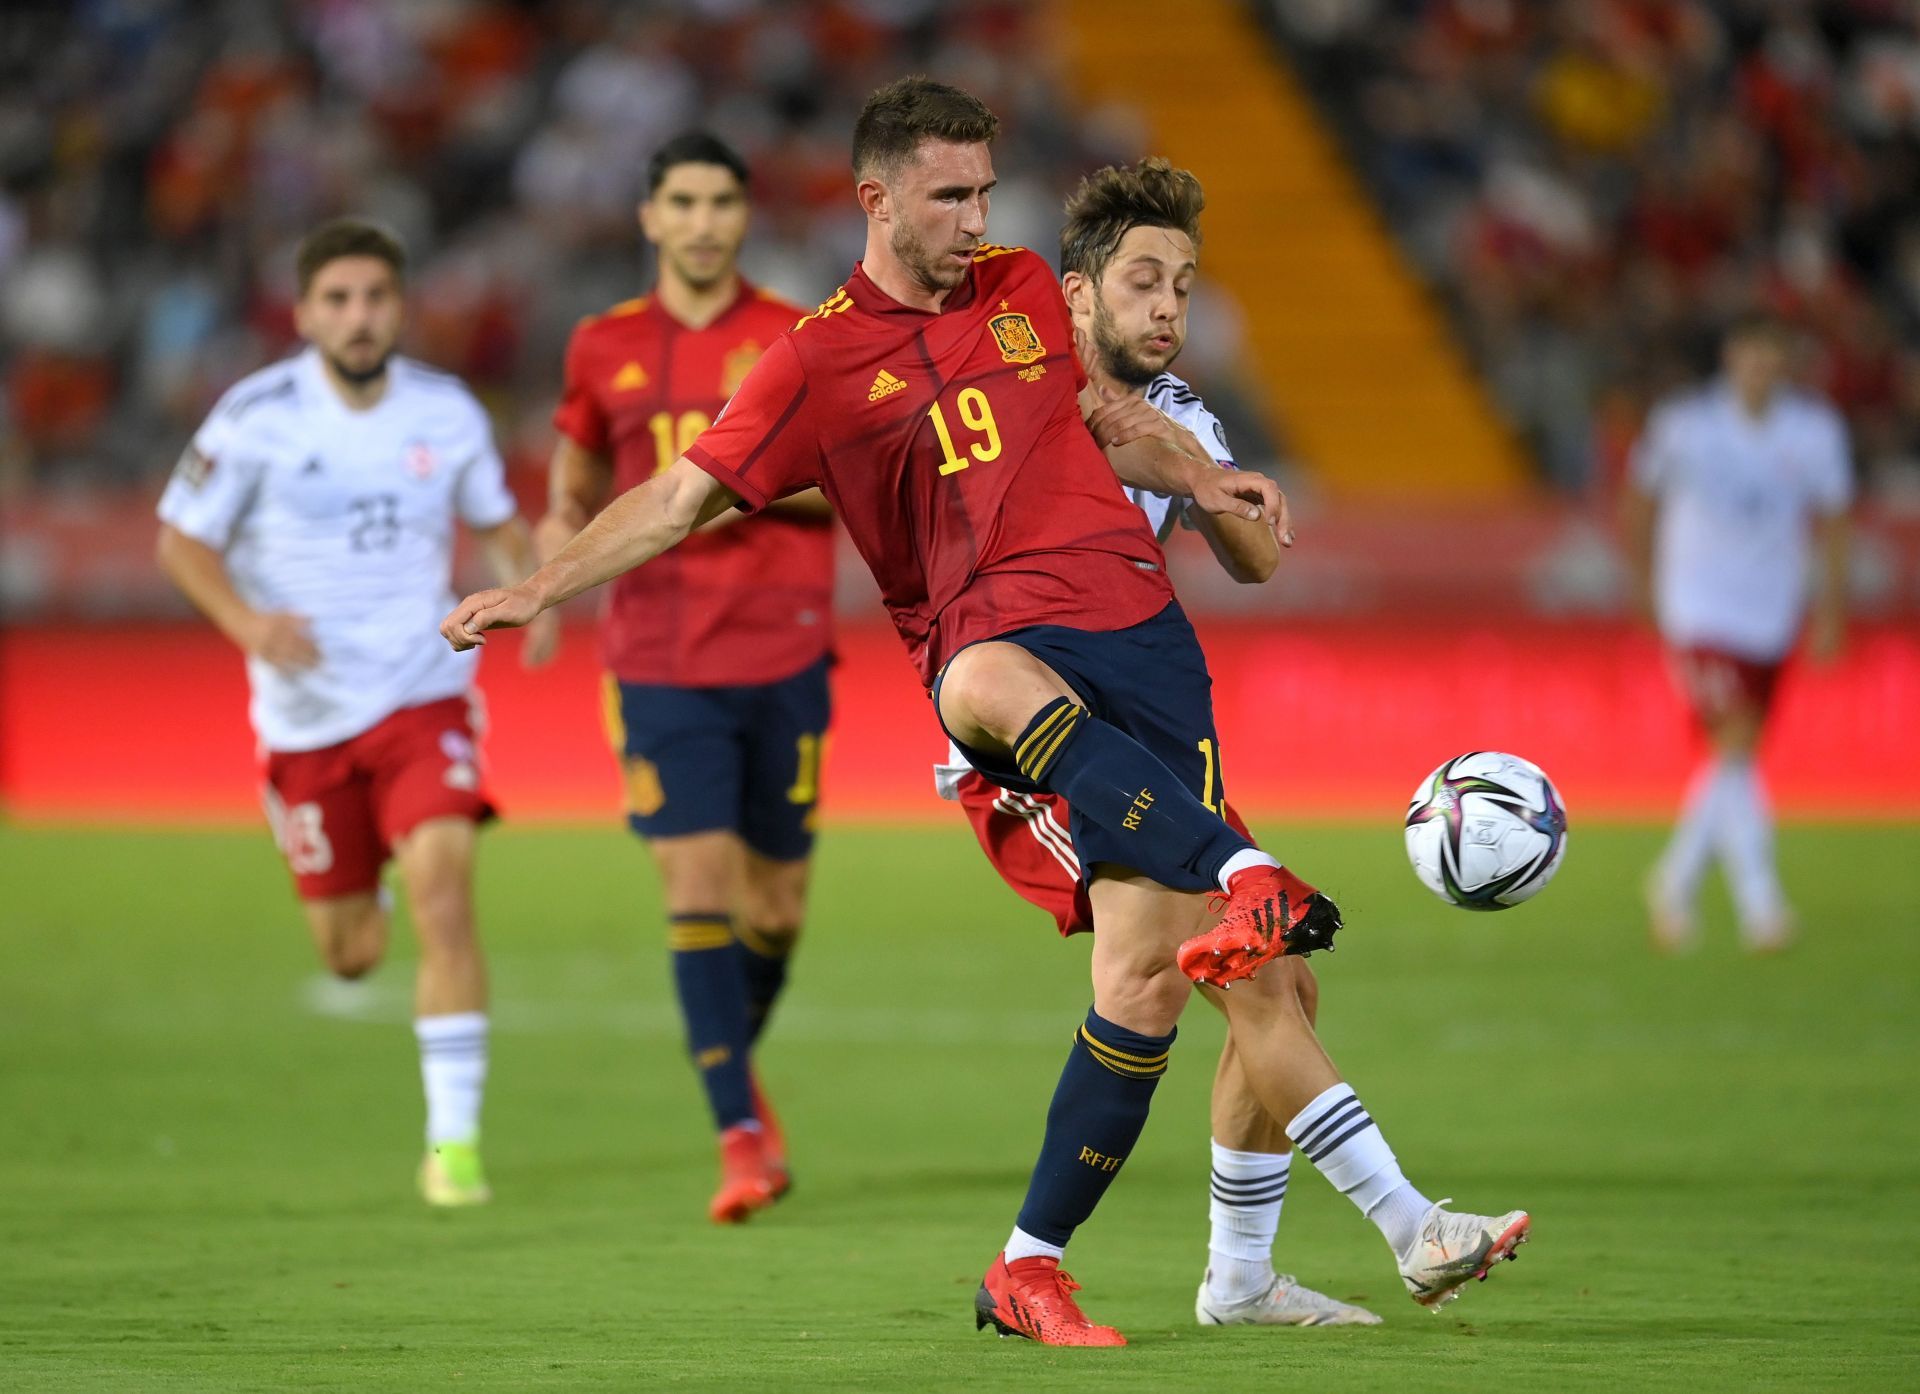 Spain will be without their main centre-back Aymeric Laporte